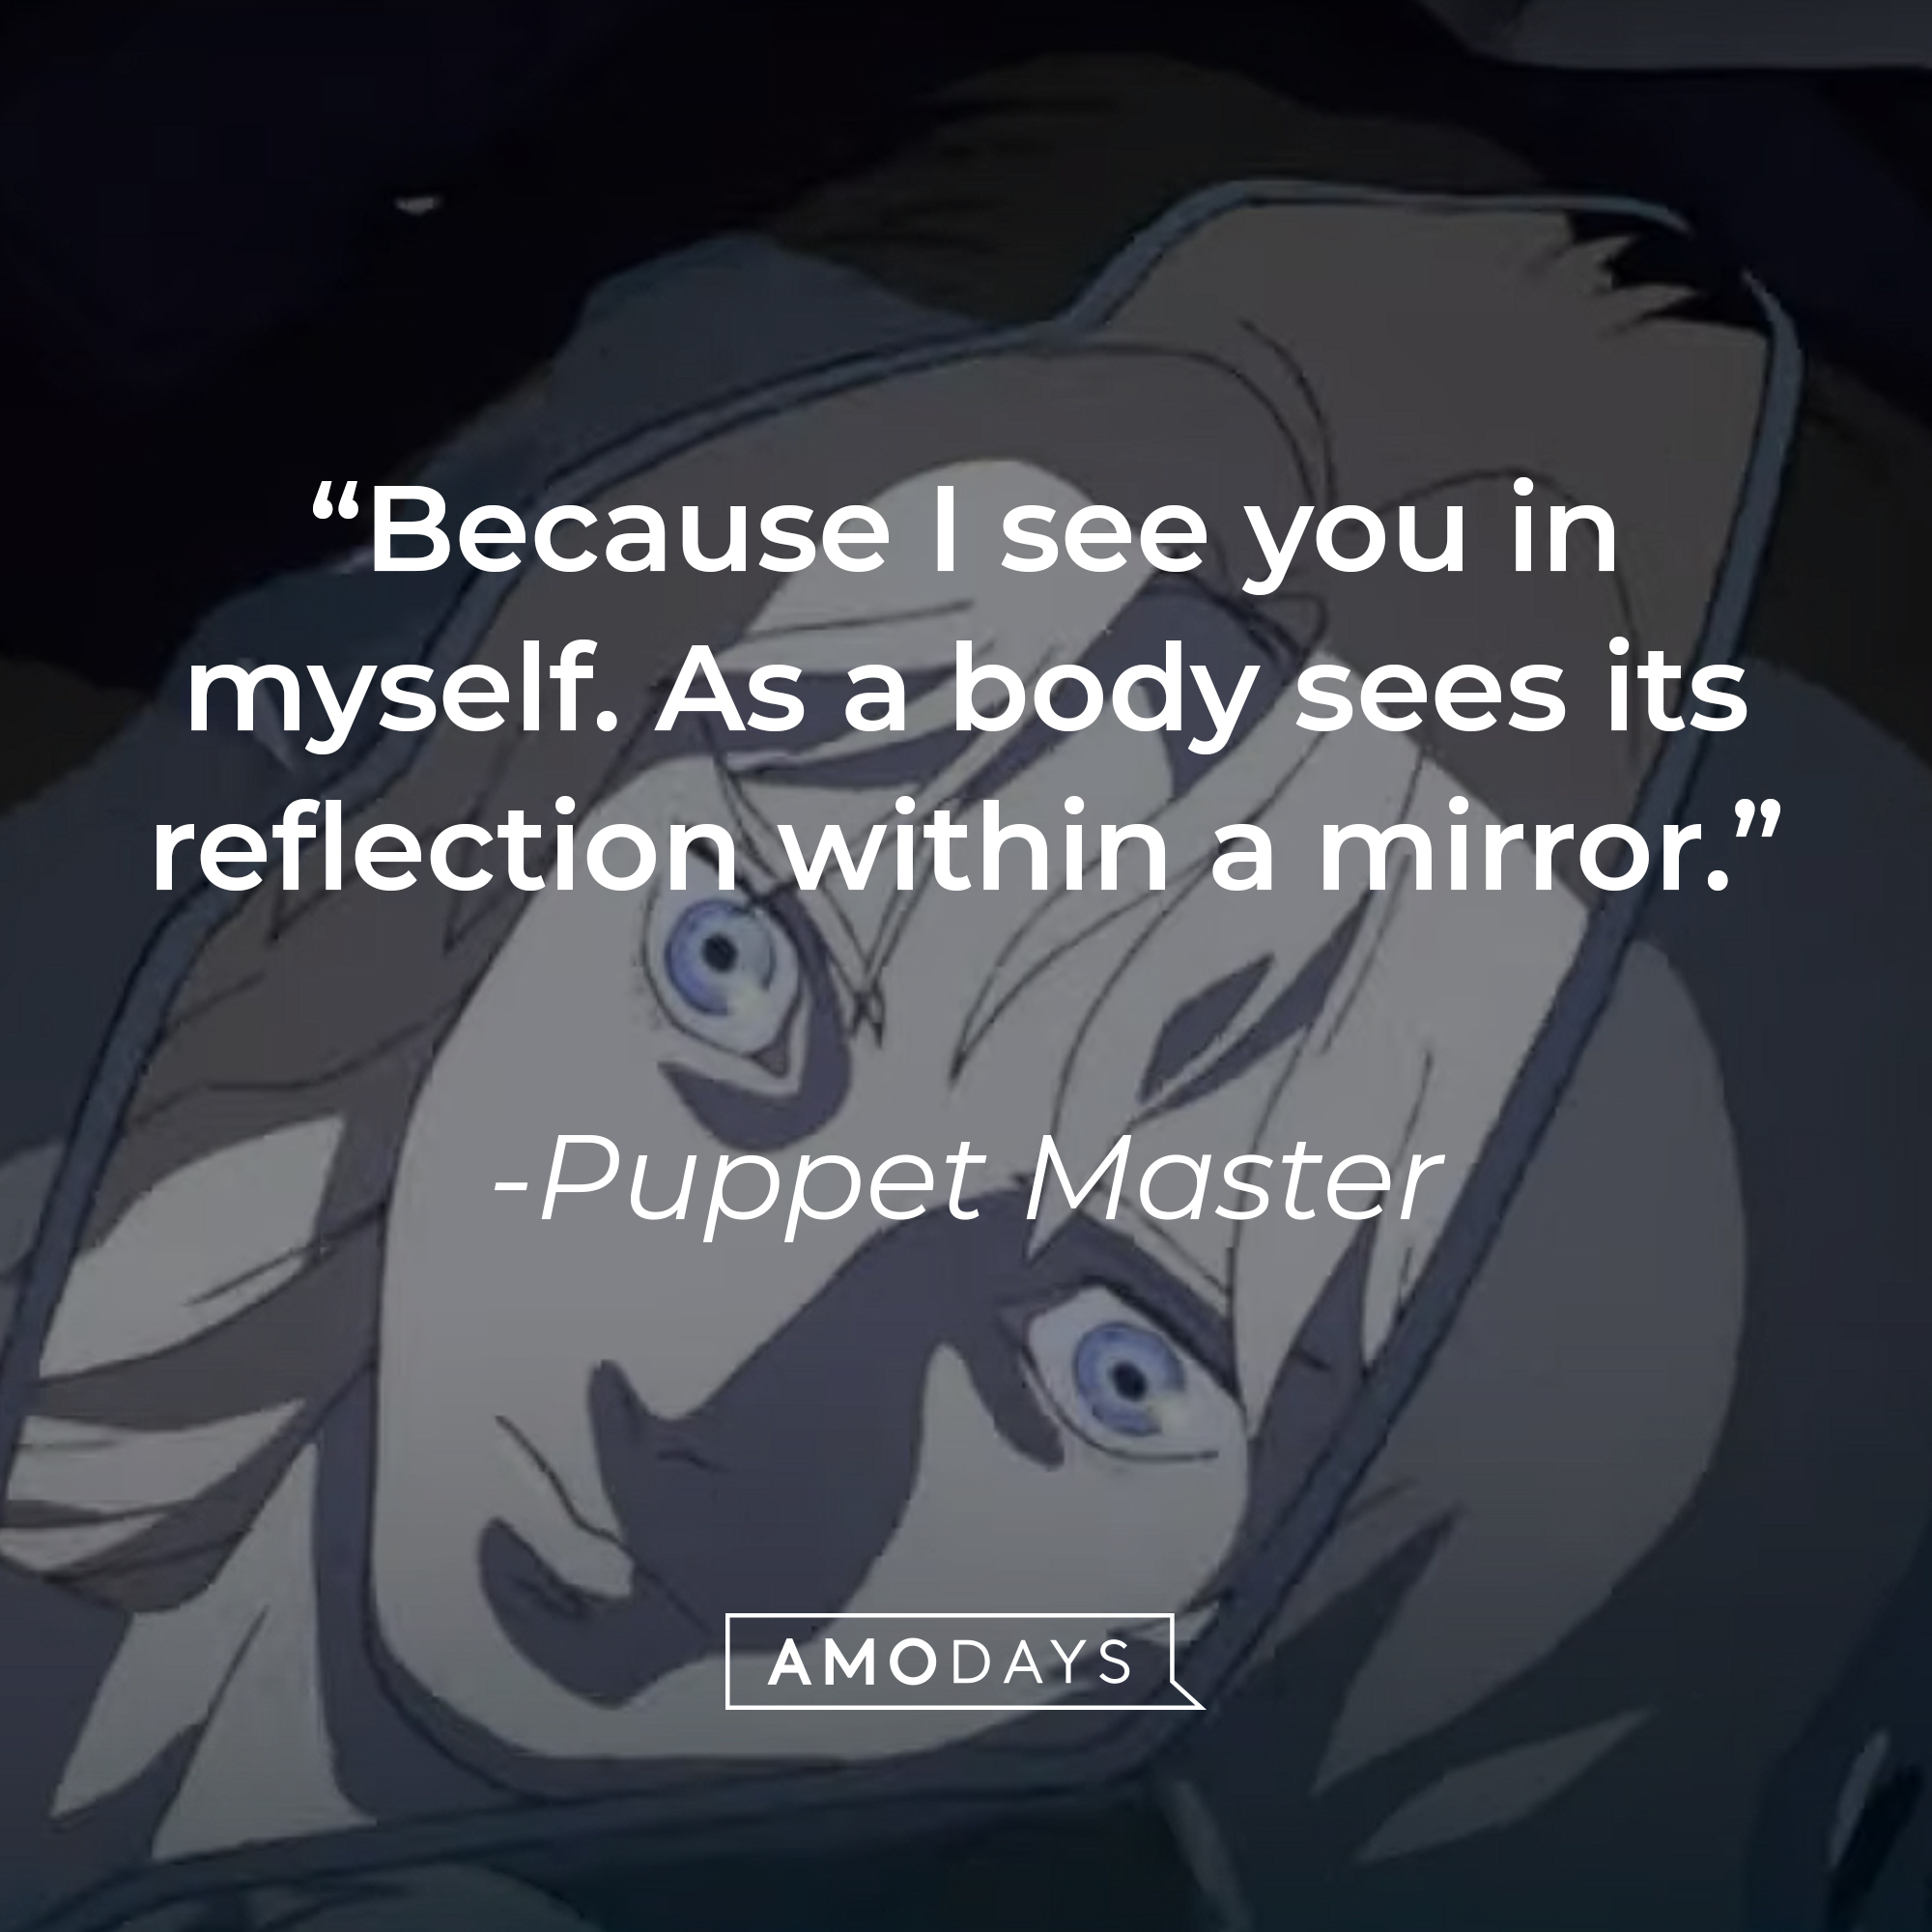 Puppet Master with his quote: "Because I see you in myself. As a body sees its reflection within a mirror." | Source: YouTube.com/LionsgateMovies